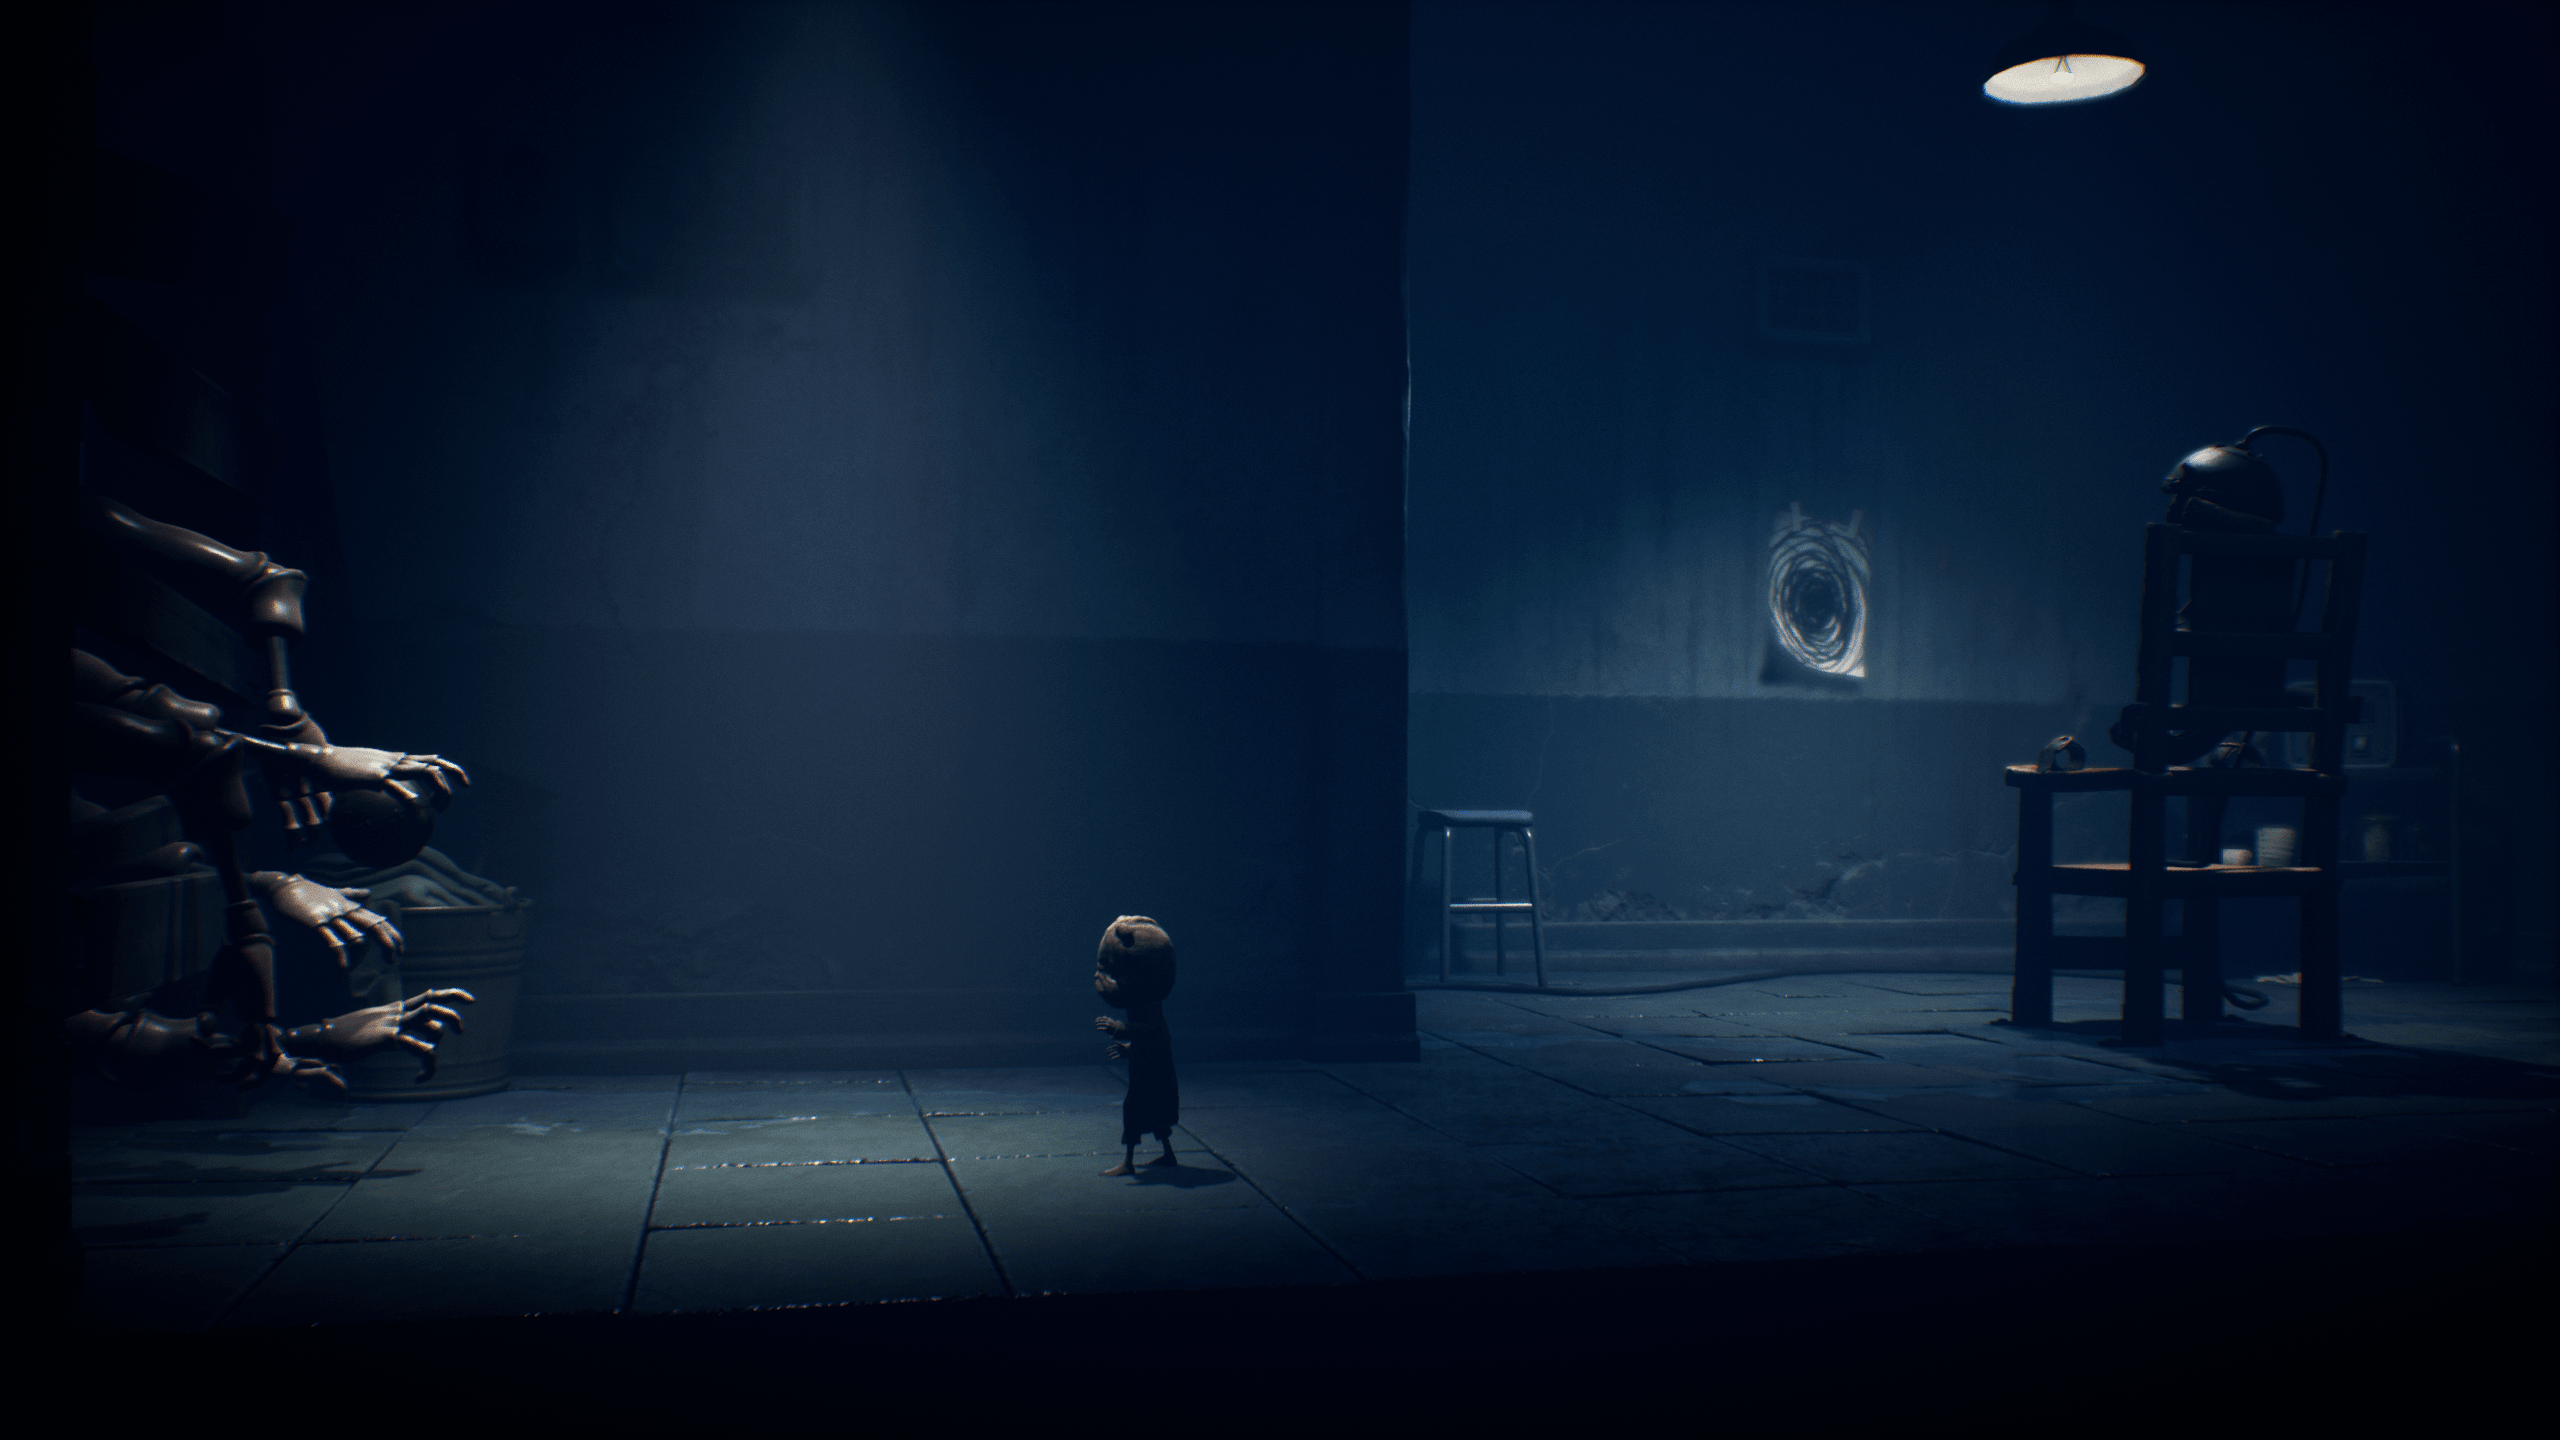 Little Nightmares II - All achievements and collectibles in chronological order